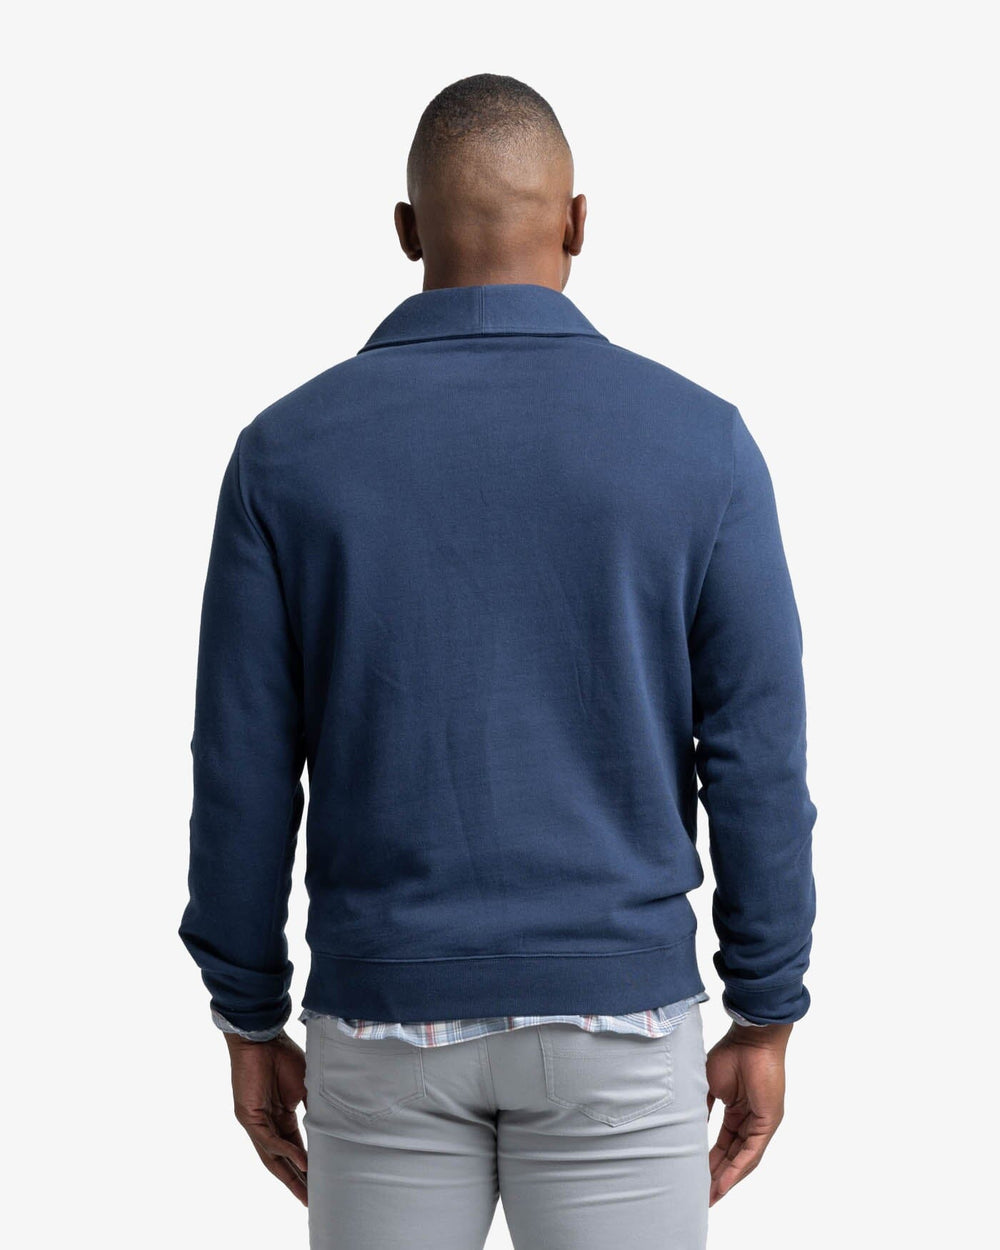 The back view of the Southern Tide Stanley Pullover by Southern Tide - Dress Blue